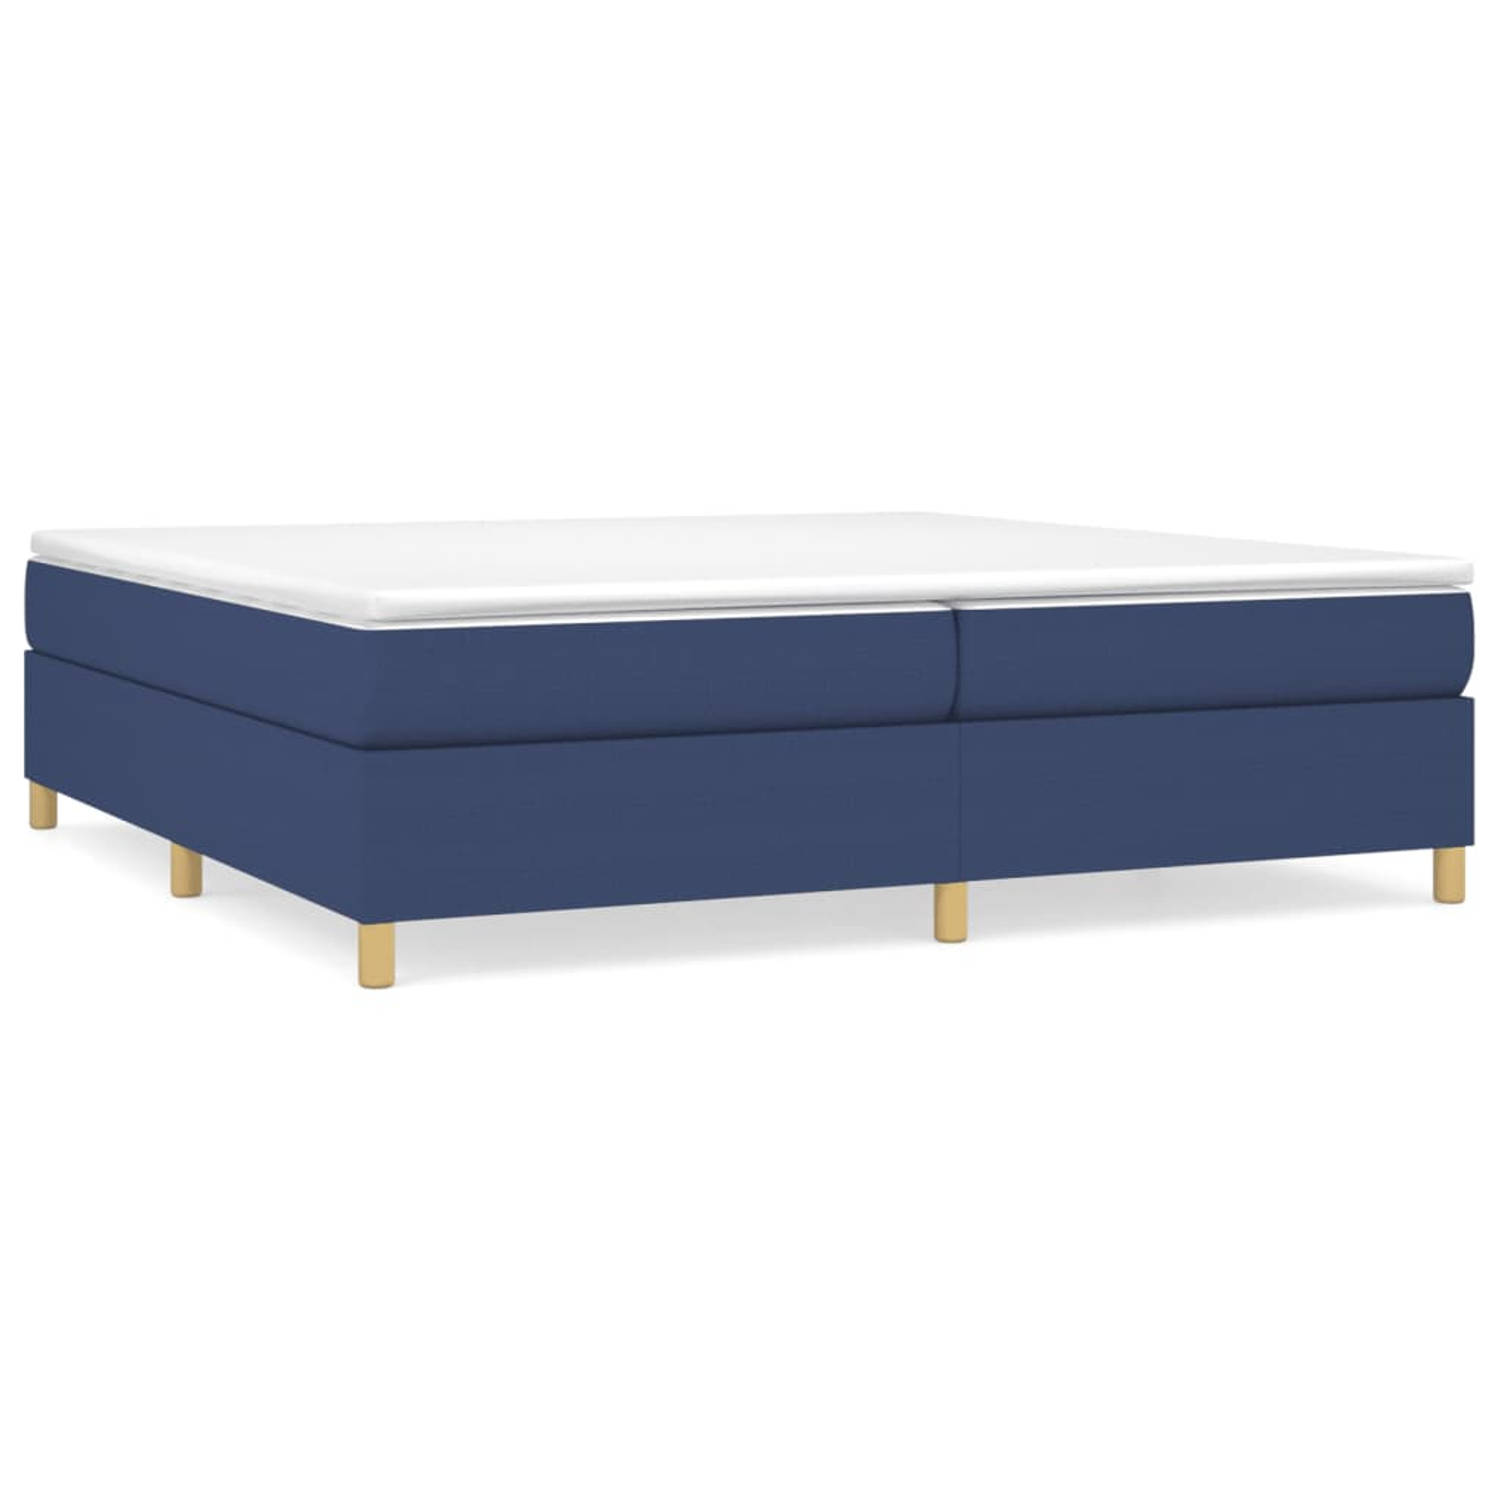 The Living Store Boxspringframe stof blauw 200x200 cm - Boxspringframe - Boxspringframes - Bed - Ledikant - Slaapmeubel - Bedframe - Bedbodem - Tweepersoonsbed - Boxspring - Bedden